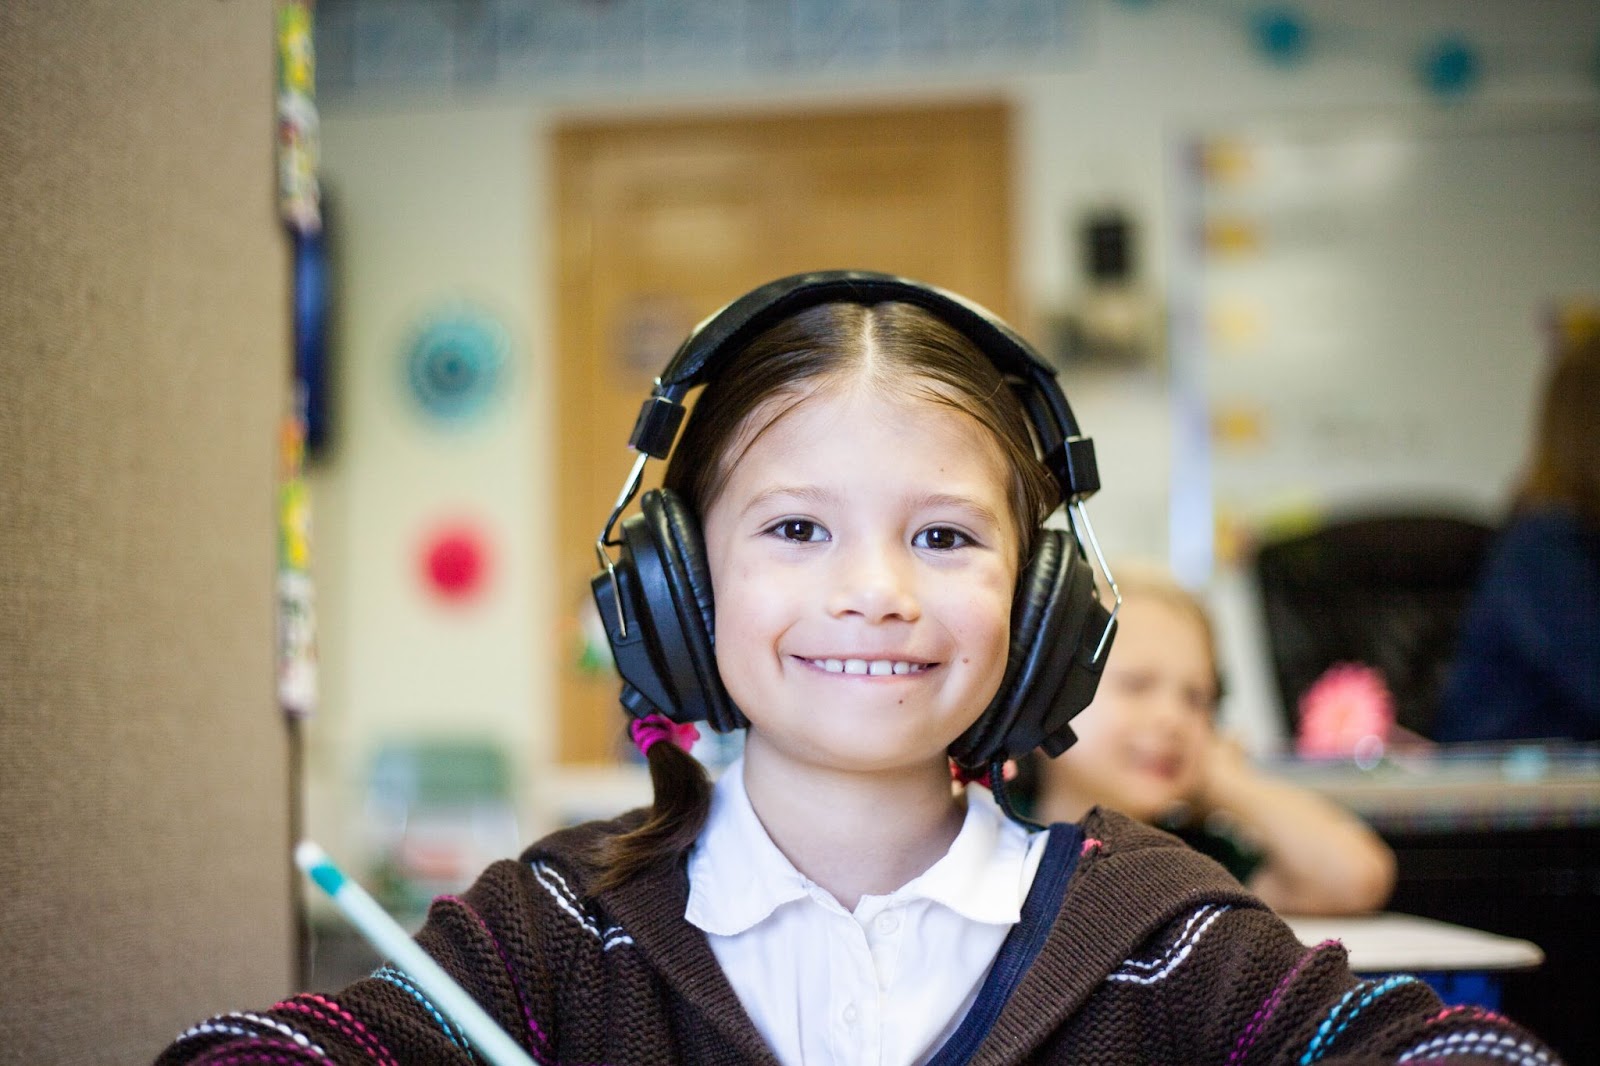 child smiling with headphones on